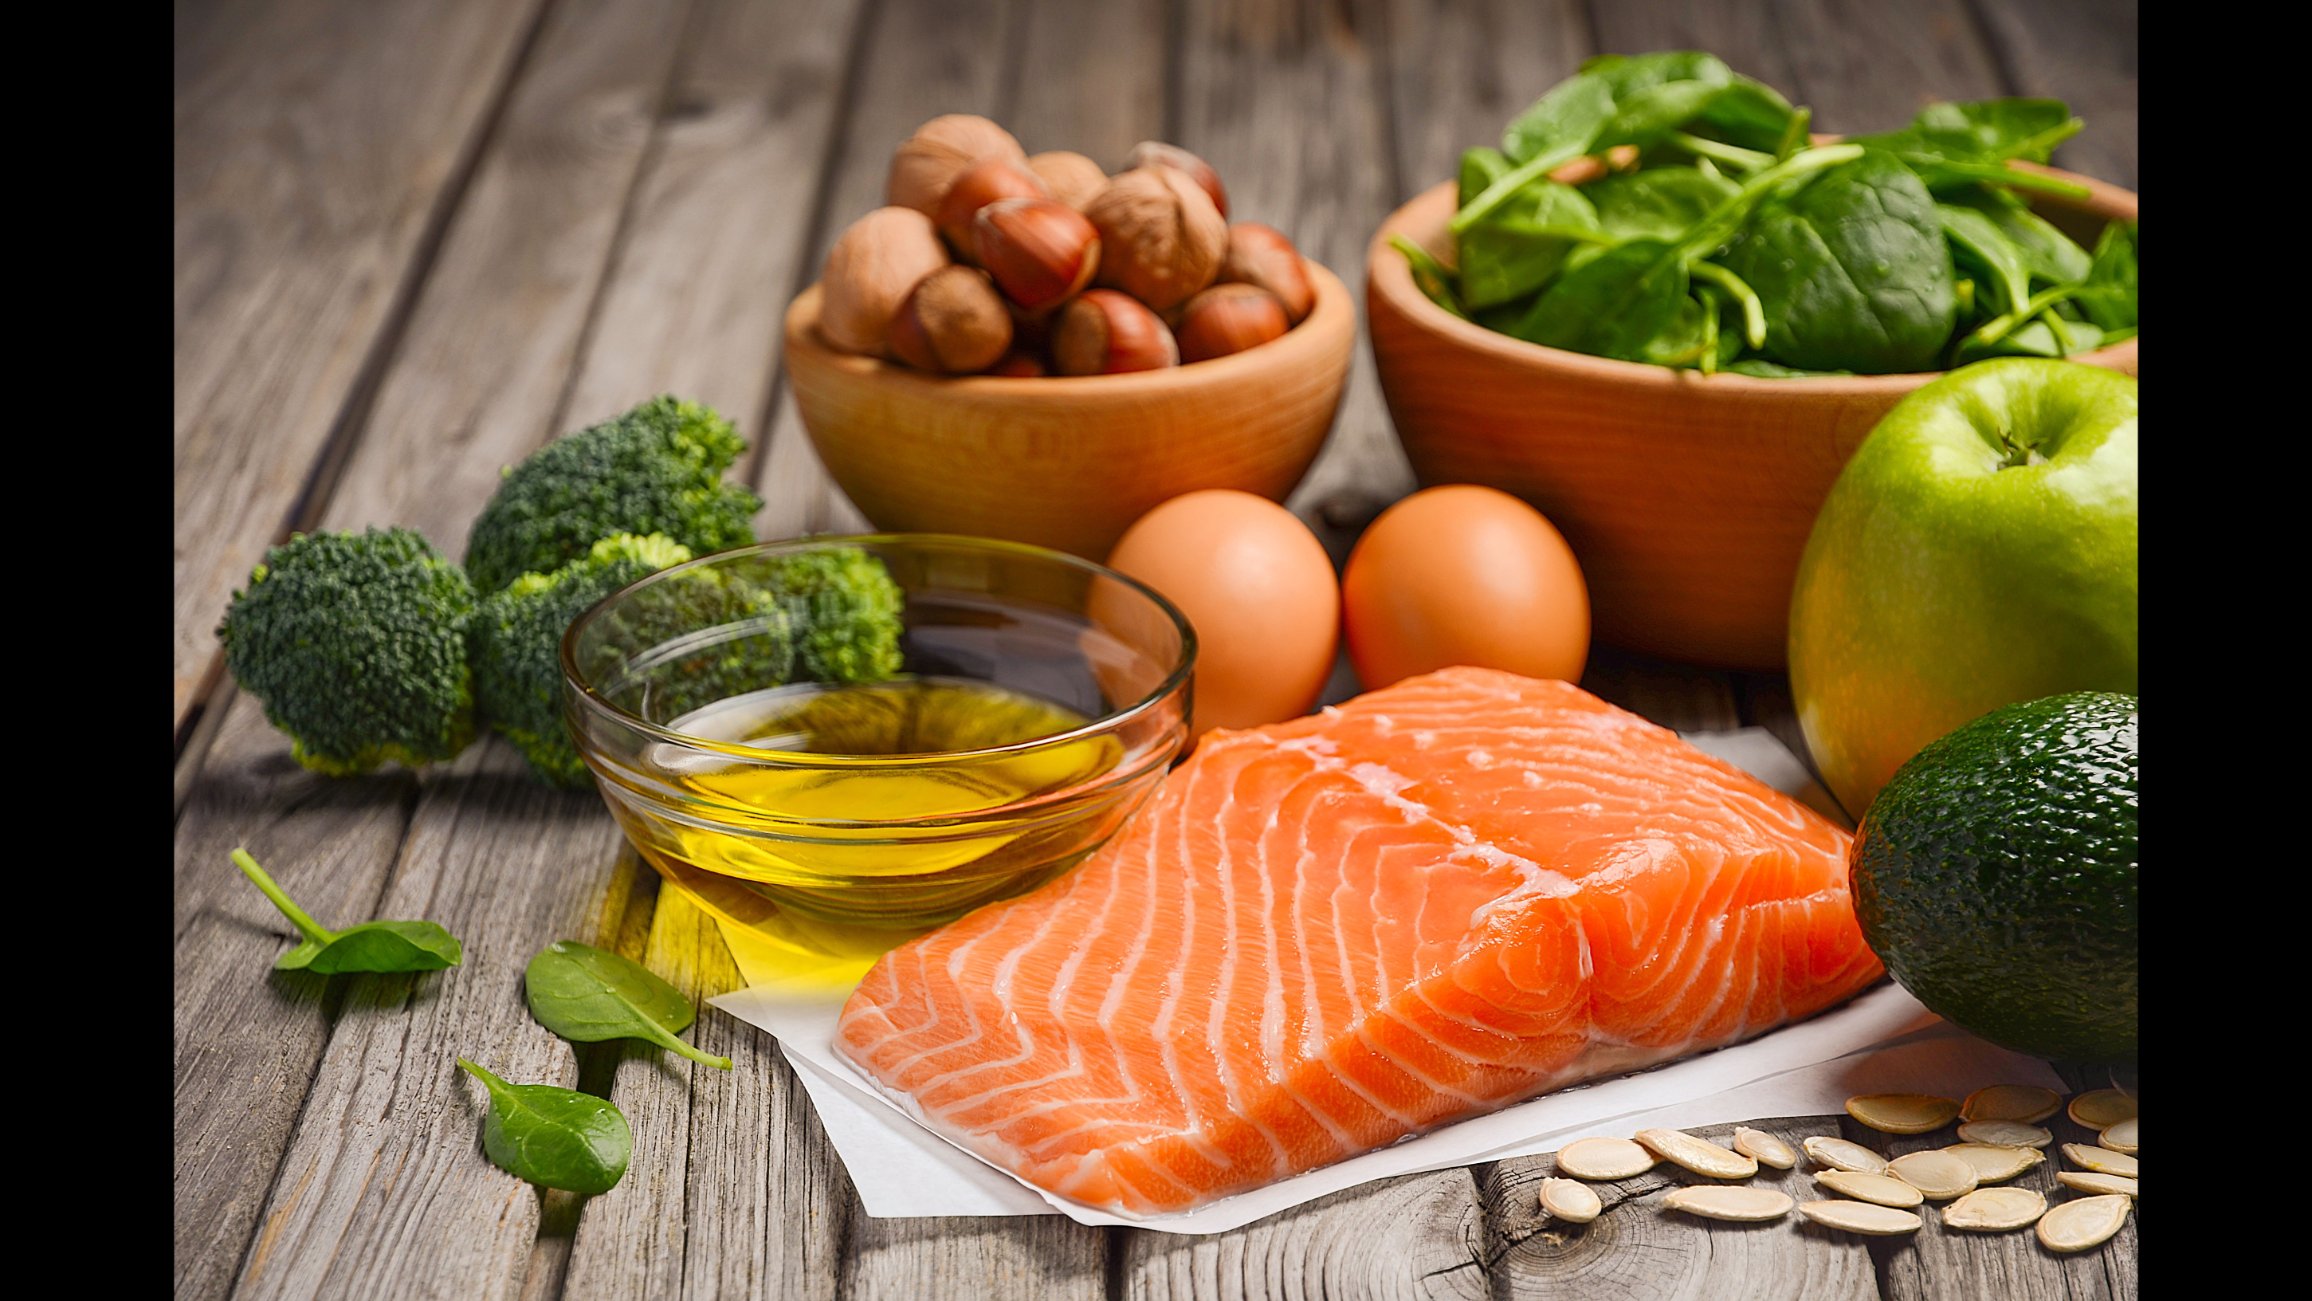 How does the Oily fish consumption decreased the risk of dementia ?